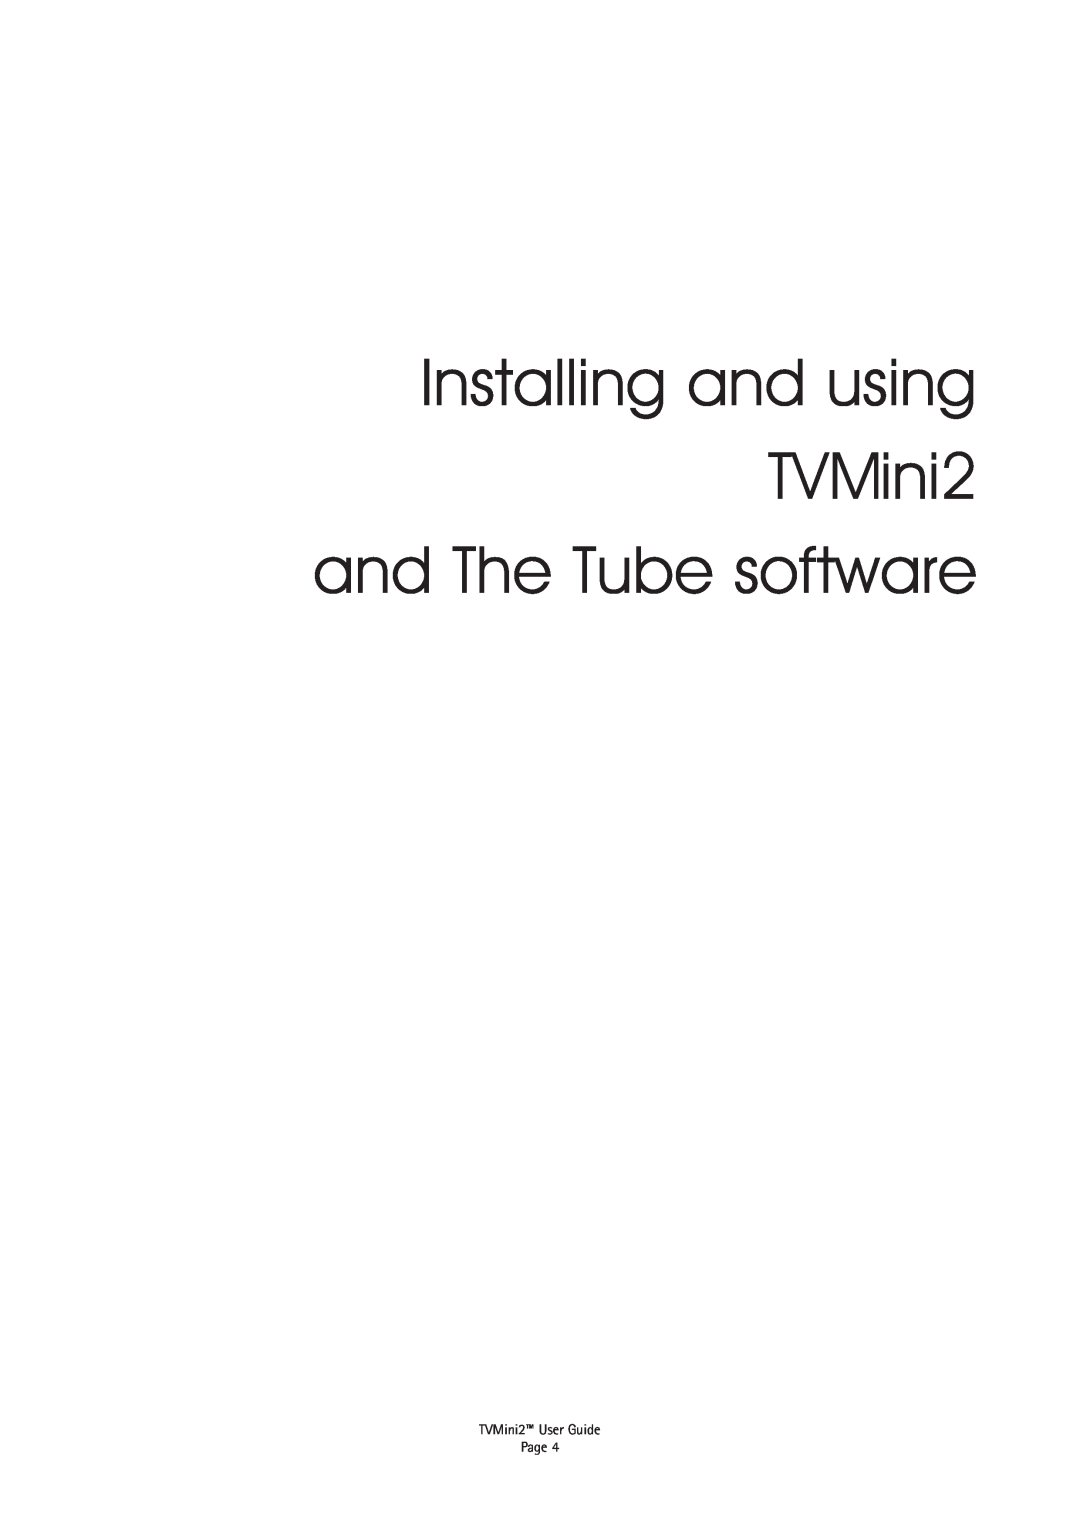 Miglia Technology TVMini 2 manual Installing and using TVMini2 and The Tube software, TVMini2 User Guide Page 